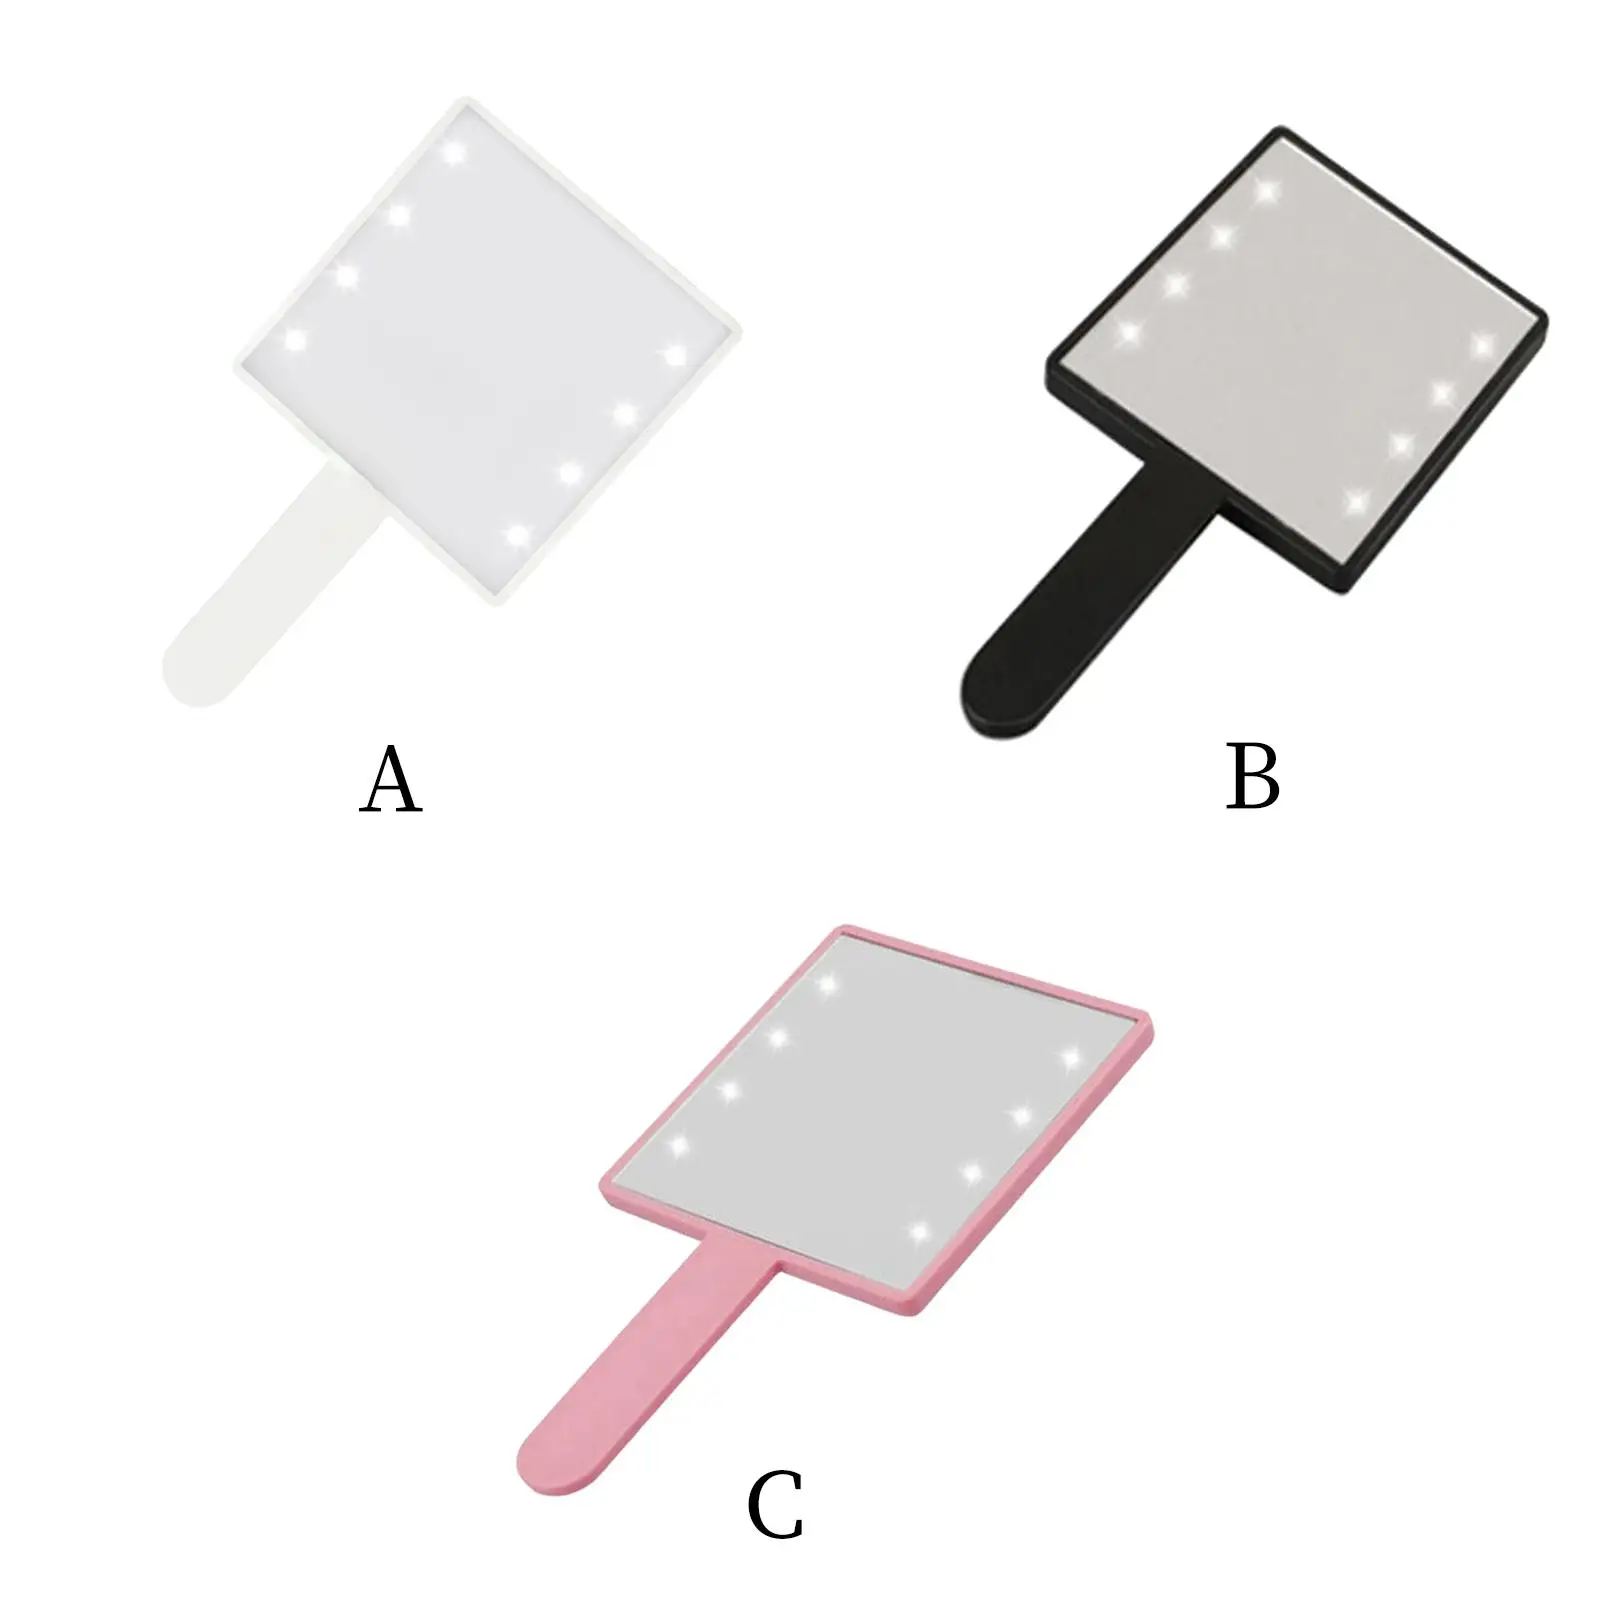 Makeup Mirror with LED Light, Gift for Woman, Vanity Mirror, Handheld Travel Makeup Mirror, Square Compact Portable, for Home